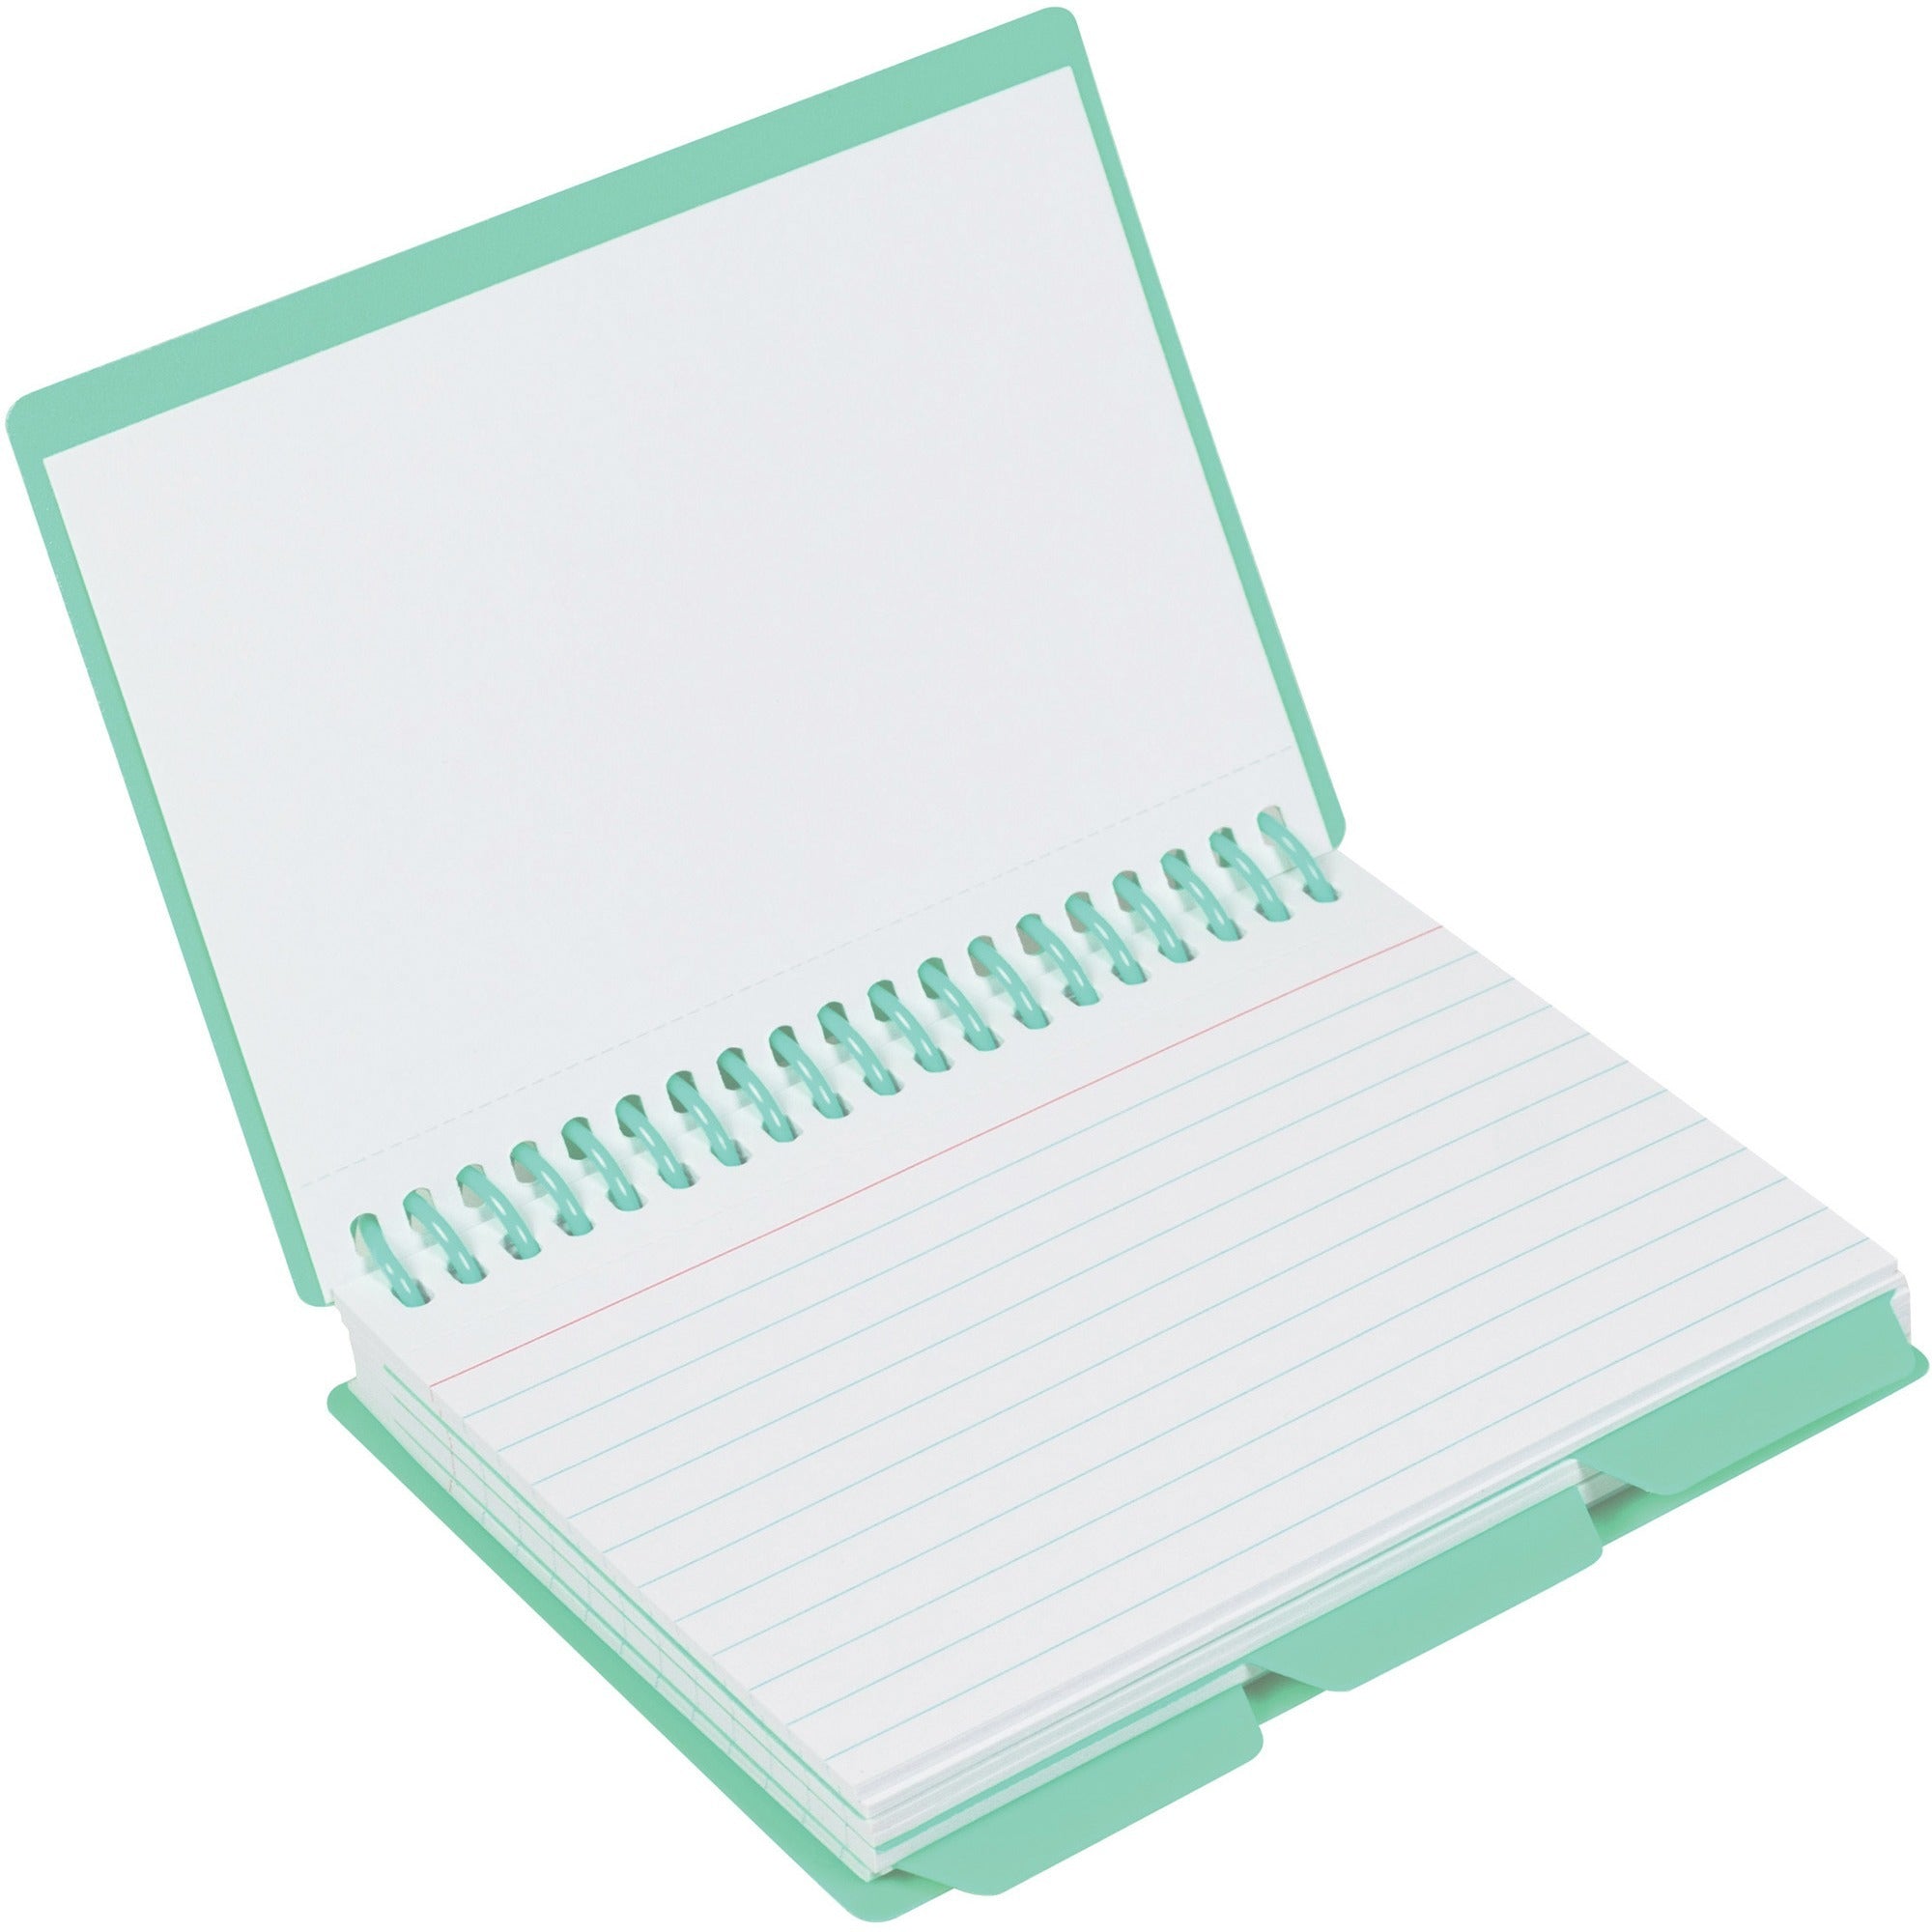 c-line-spiral-bound-index-card-notebook-with-index-tabs-assorted-tropic-tones-colors-1-ea-48750_cli48750 - 1